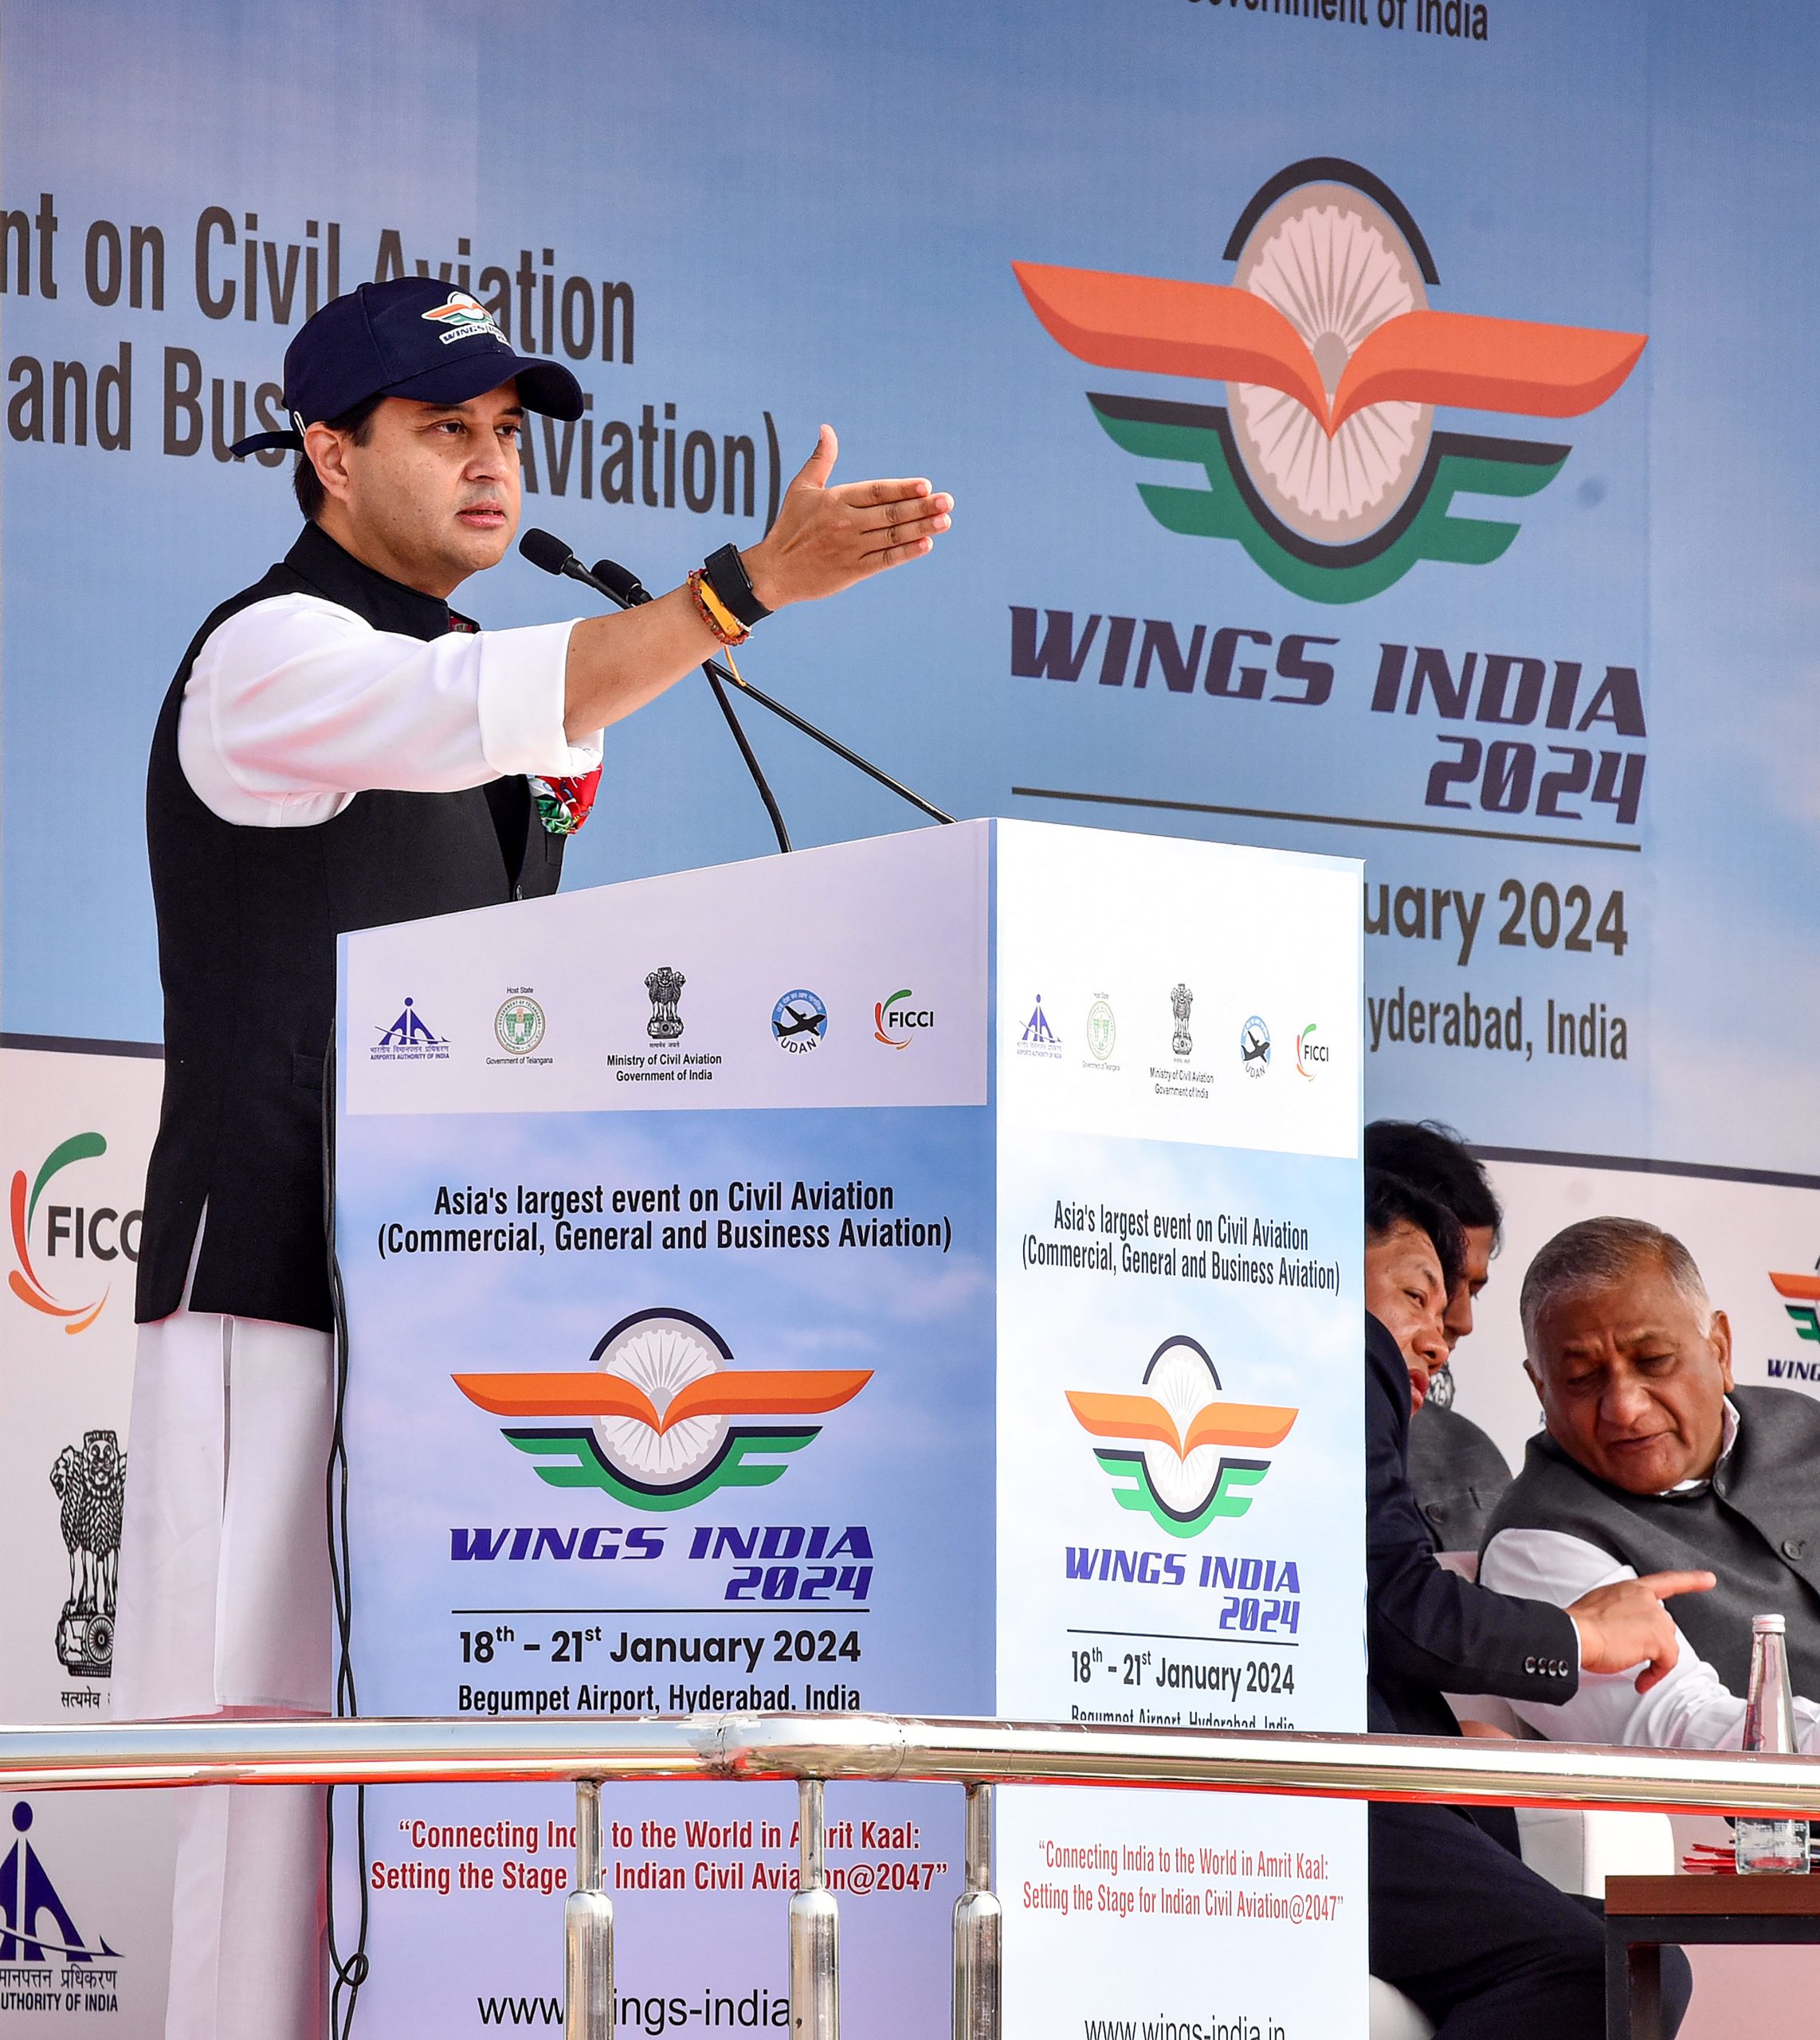 Air passenger traffic in India likely to reach 300 mn by 2030: Jyotiraditya Scindia